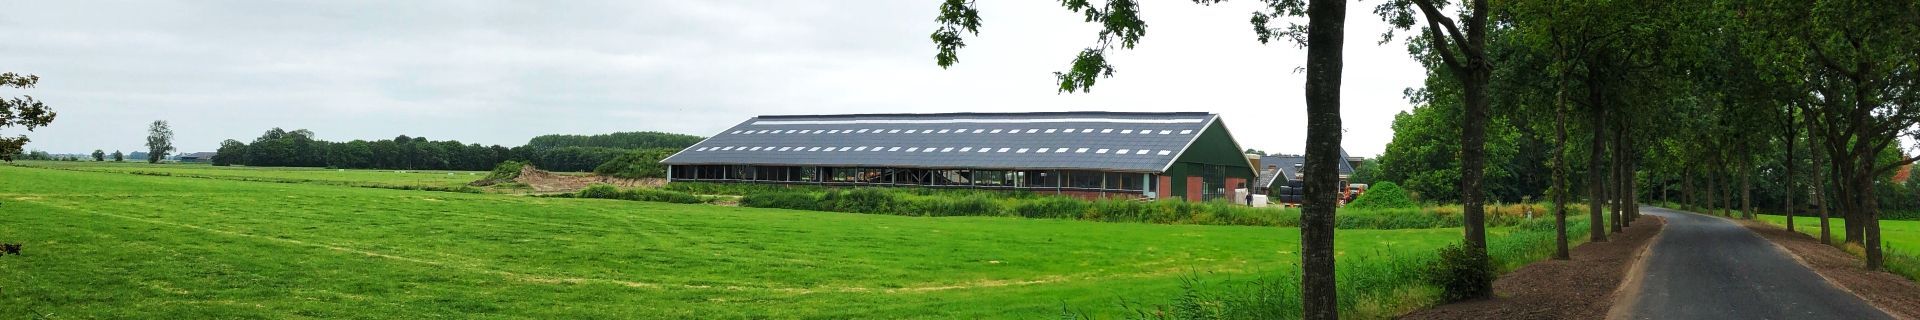 Organic management is a contributory factor in barn construction and dairy housing equipment for dairy farmer Douwe Maat.